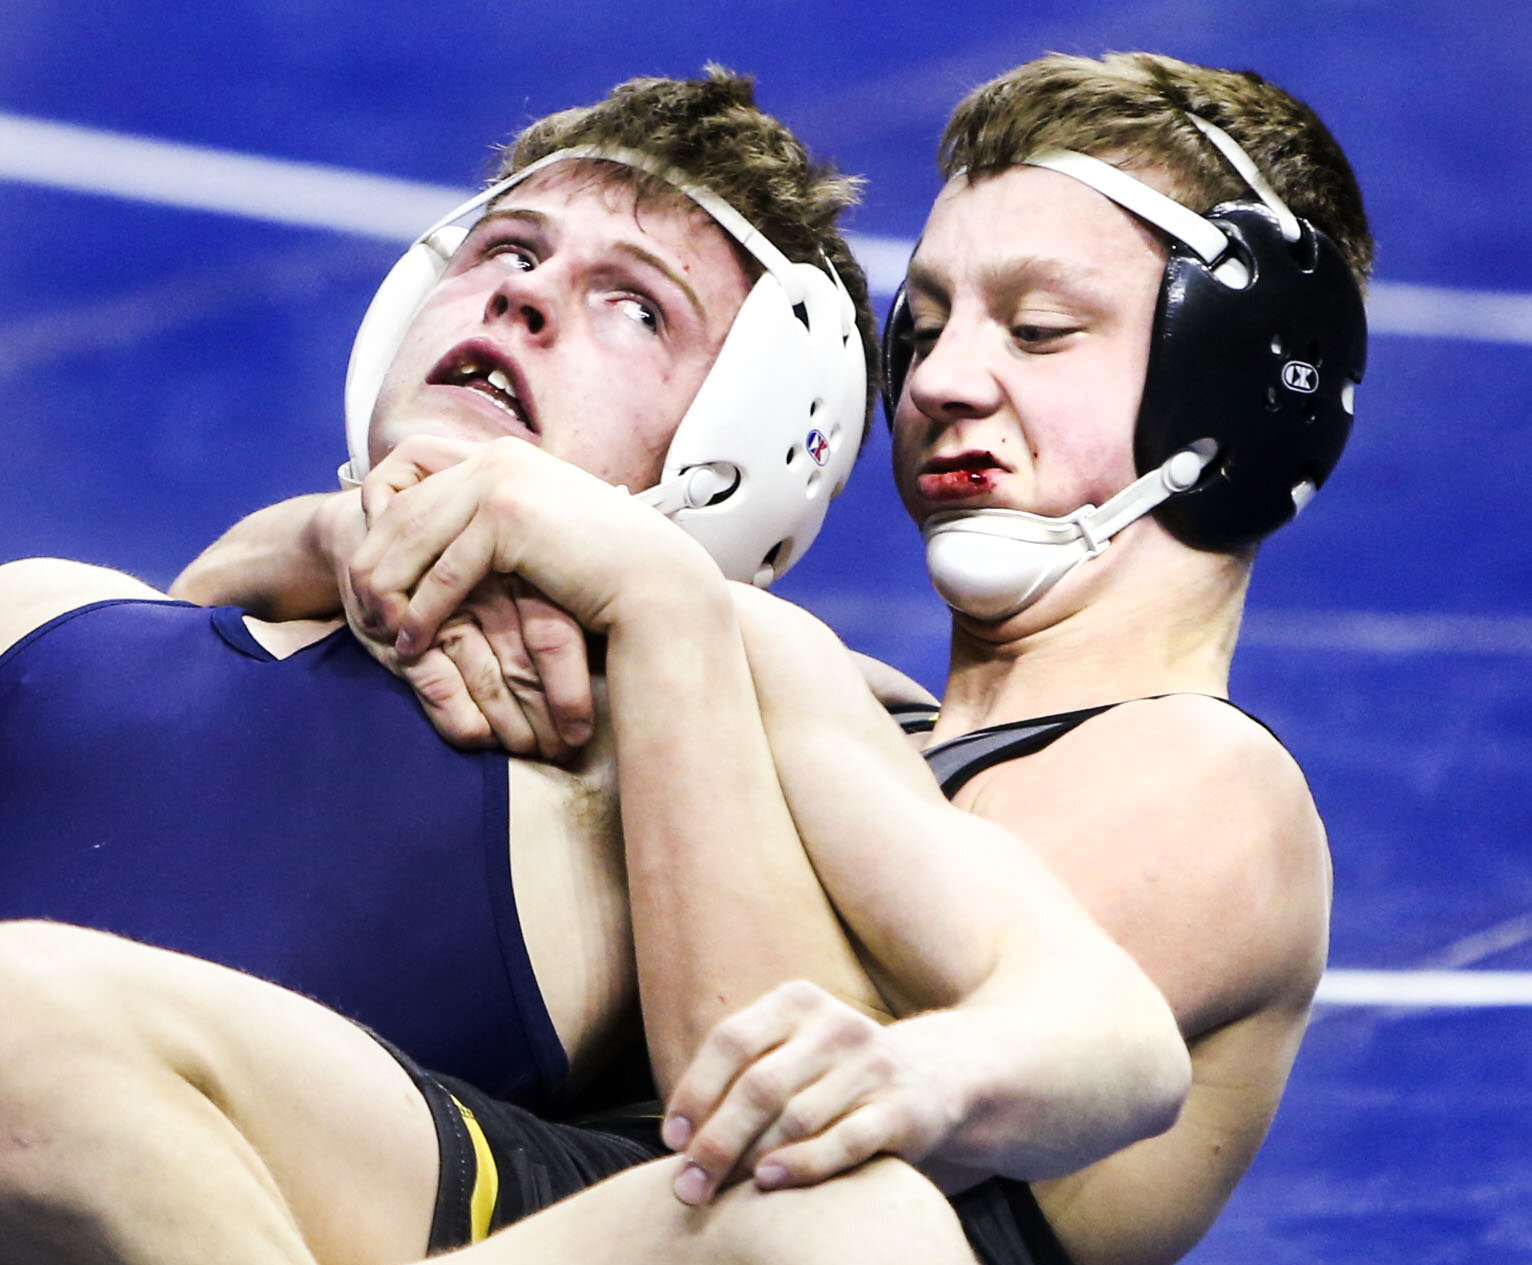  Bettendorf’s Dustin Bohren wrestles Sioc City North’s Nick Walters in the 126 weight class during the 2021 IHSAA State Wrestling Tournament at Wells Fargo Arena in Des Moines, Iowa, Friday, February 19, 2021. 